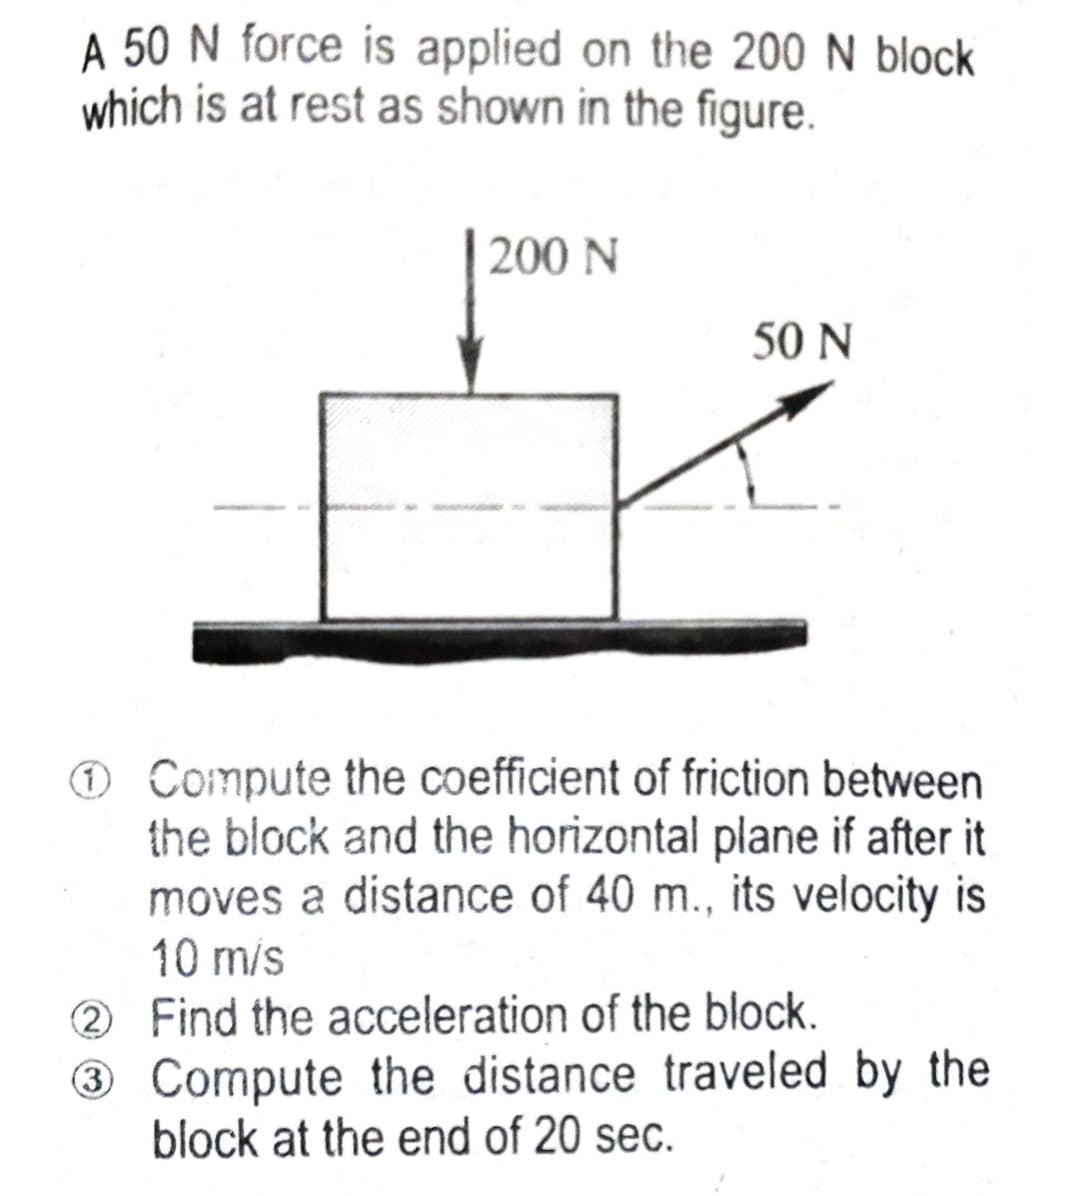 A 50 N force is applied on the 200 N block
which is at rest as shown in the figure.
200 N
50 N
Ⓒ Compute the coefficient of friction between
the block and the horizontal plane if after it
moves a distance of 40 m., its velocity is
10 m/s
2
Find the acceleration of the block.
3
Compute the distance traveled by the
block at the end of 20 sec.